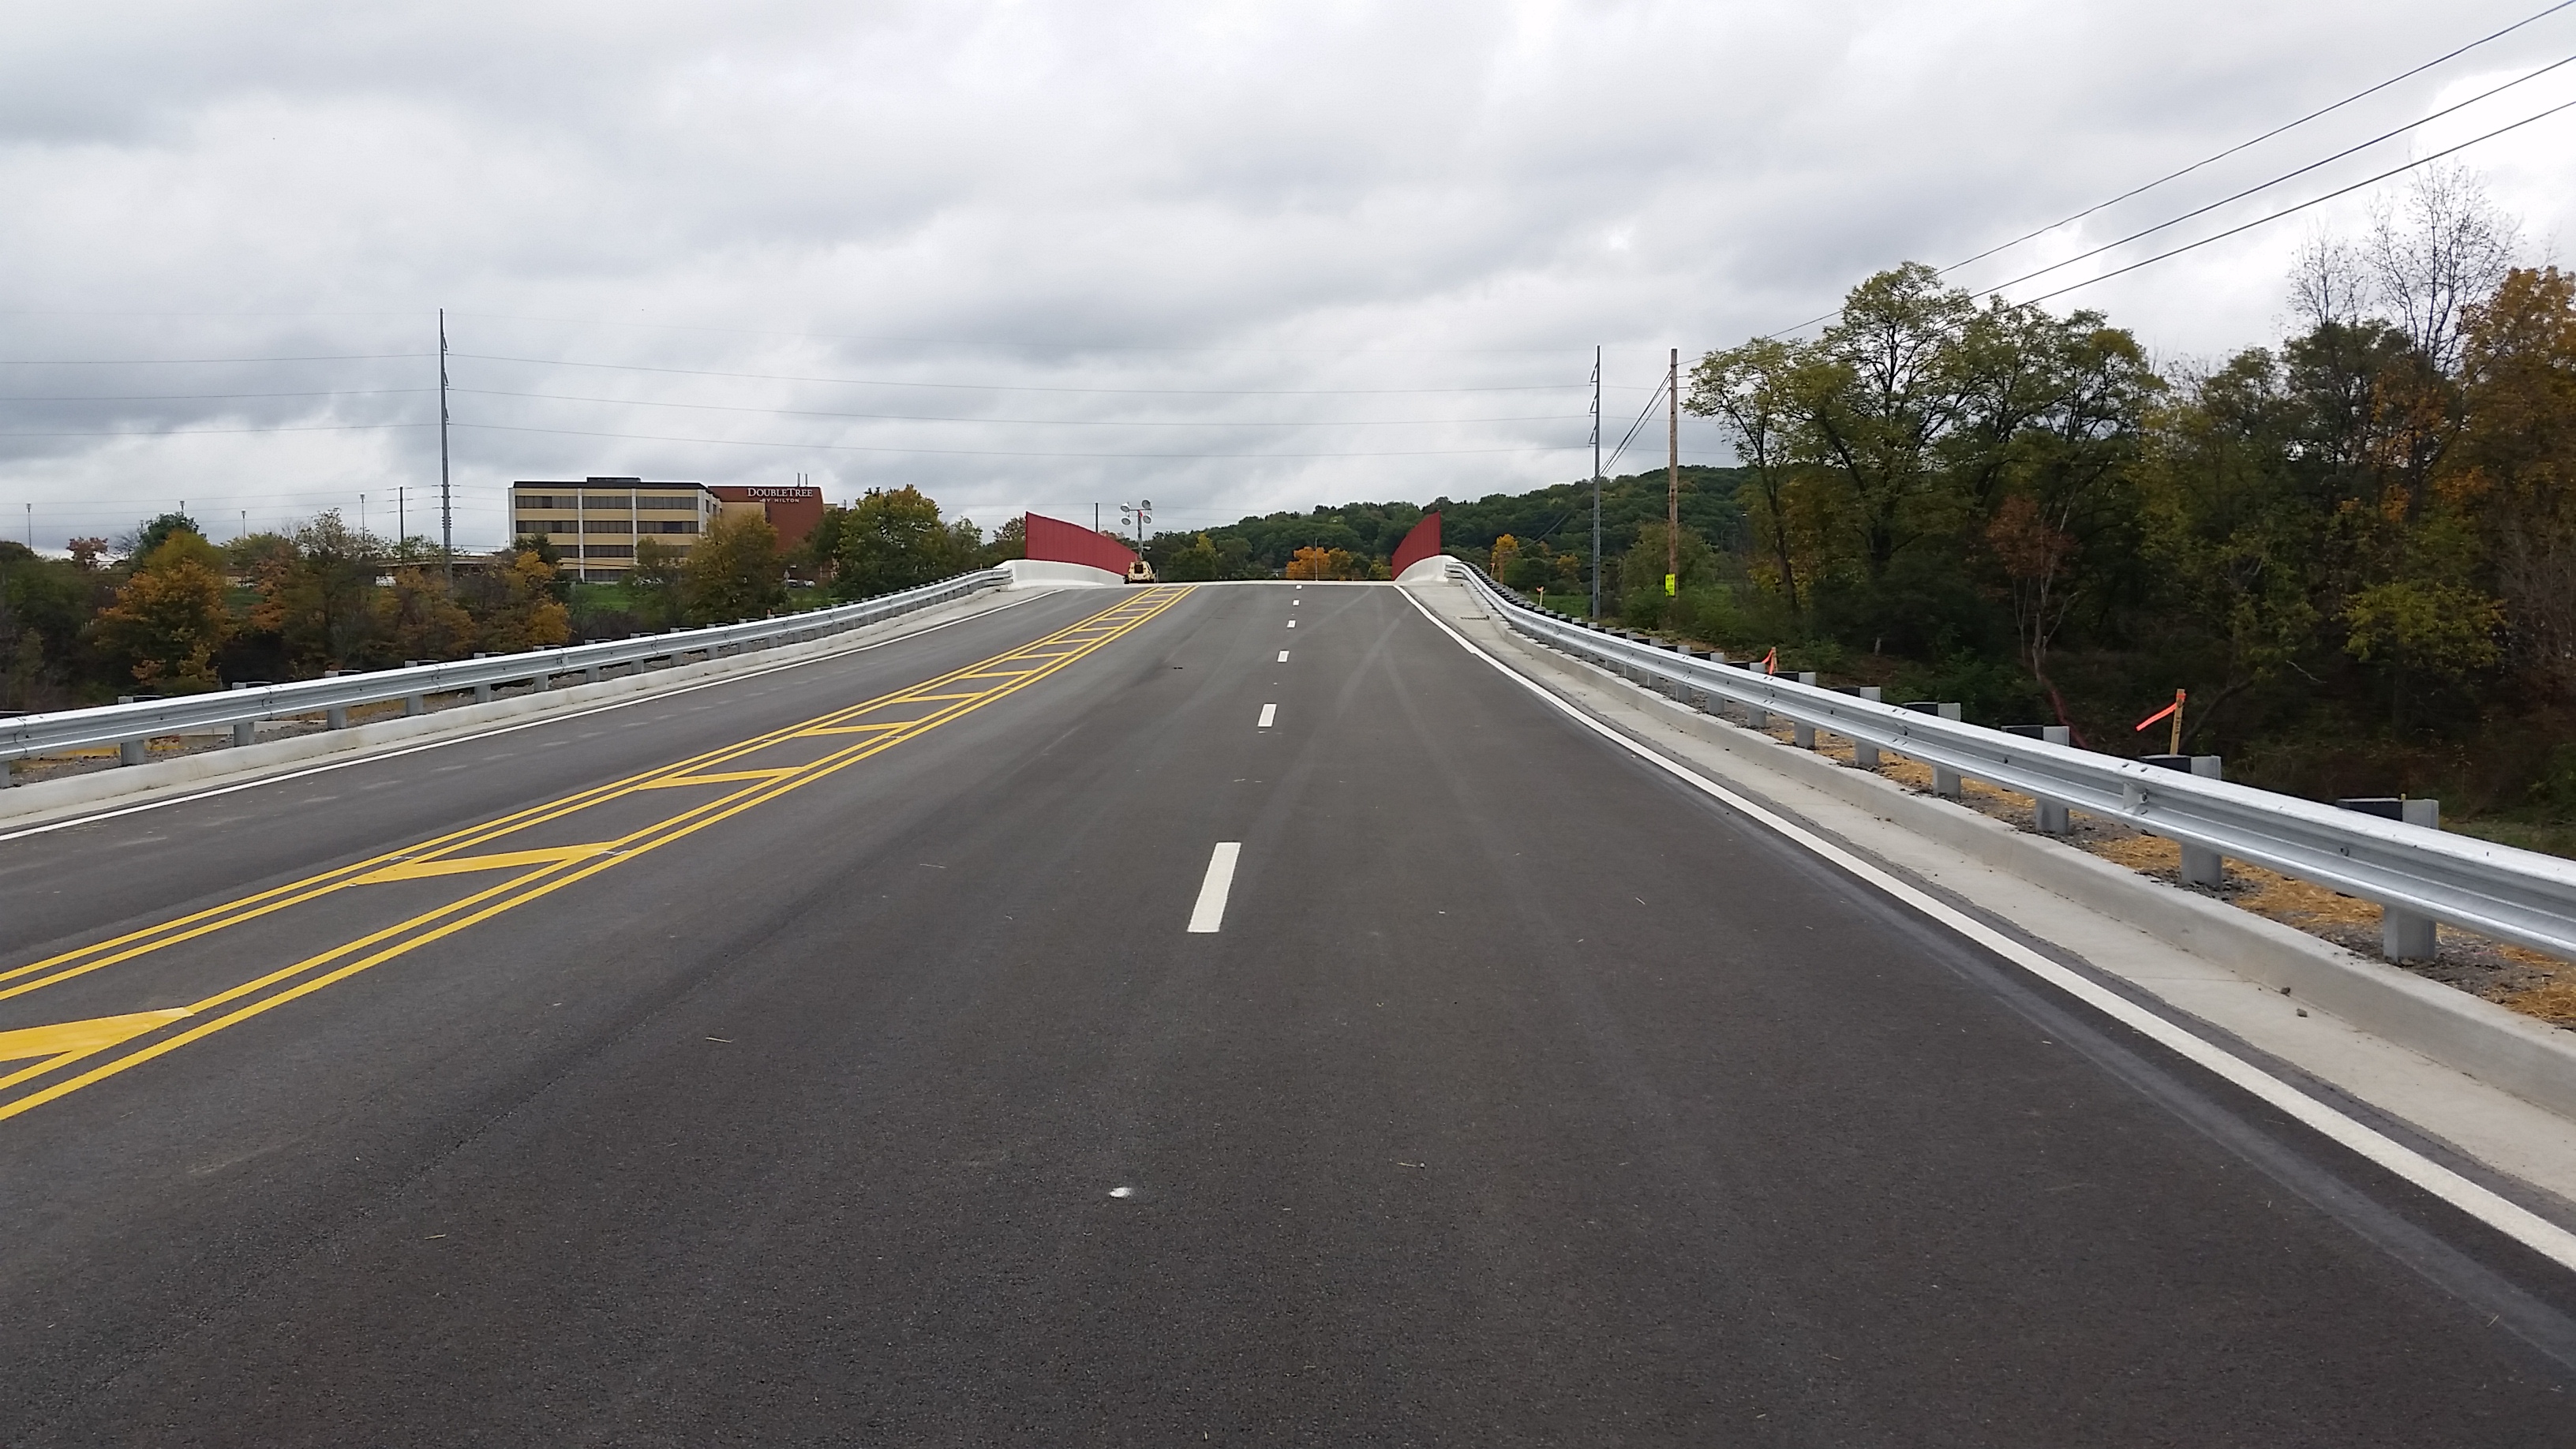 Approach to Thorn Hill Road Bridge (WB-400) Looking East (10/14/2015)